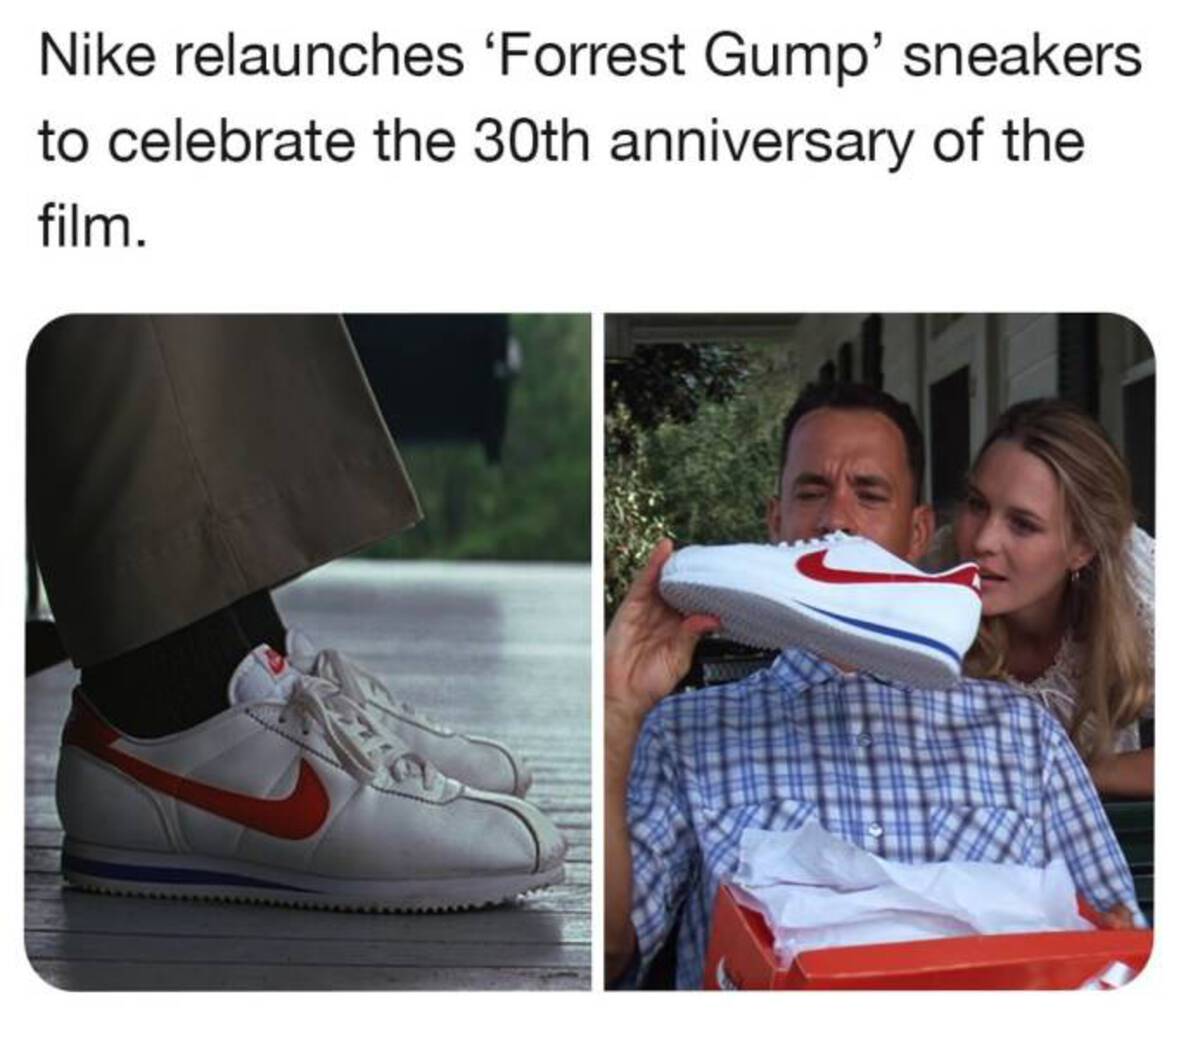 Nike relaunches 'Forrest Gump' sneakers to celebrate the 30th anniversary of the film.